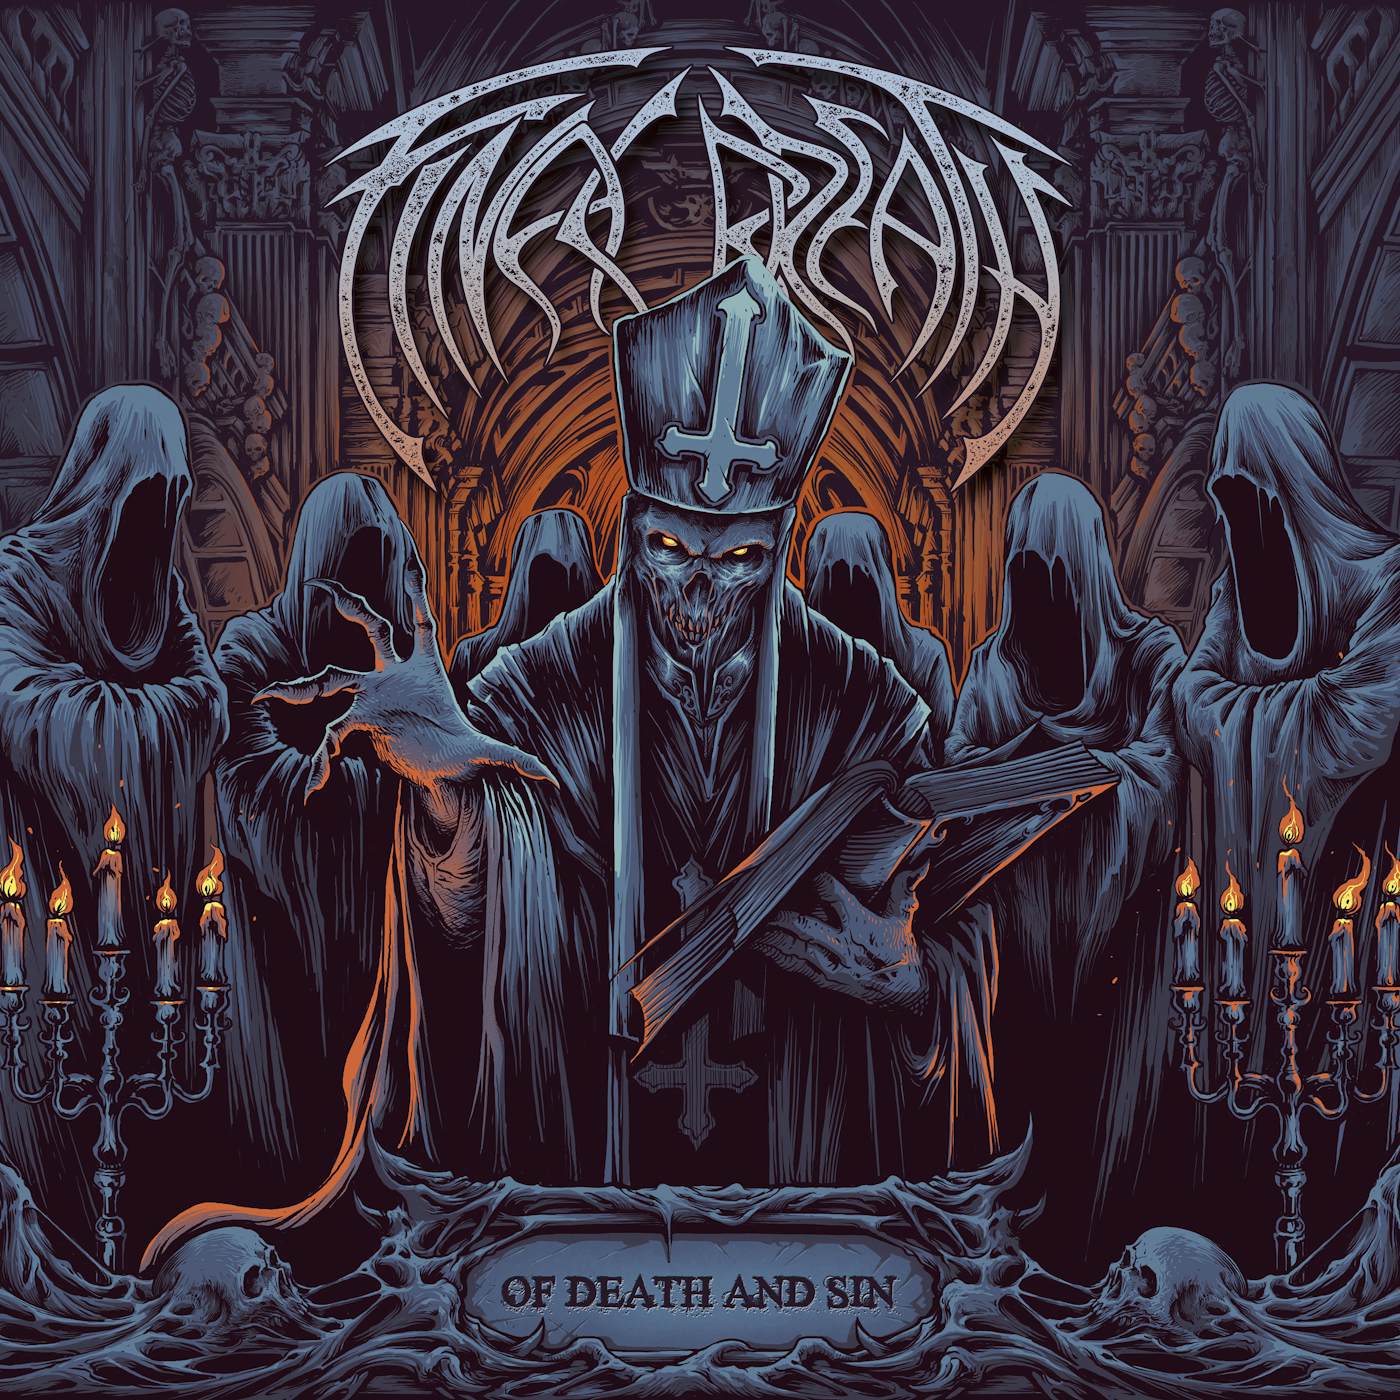 Final Breath OF DEATH AND SIN CD